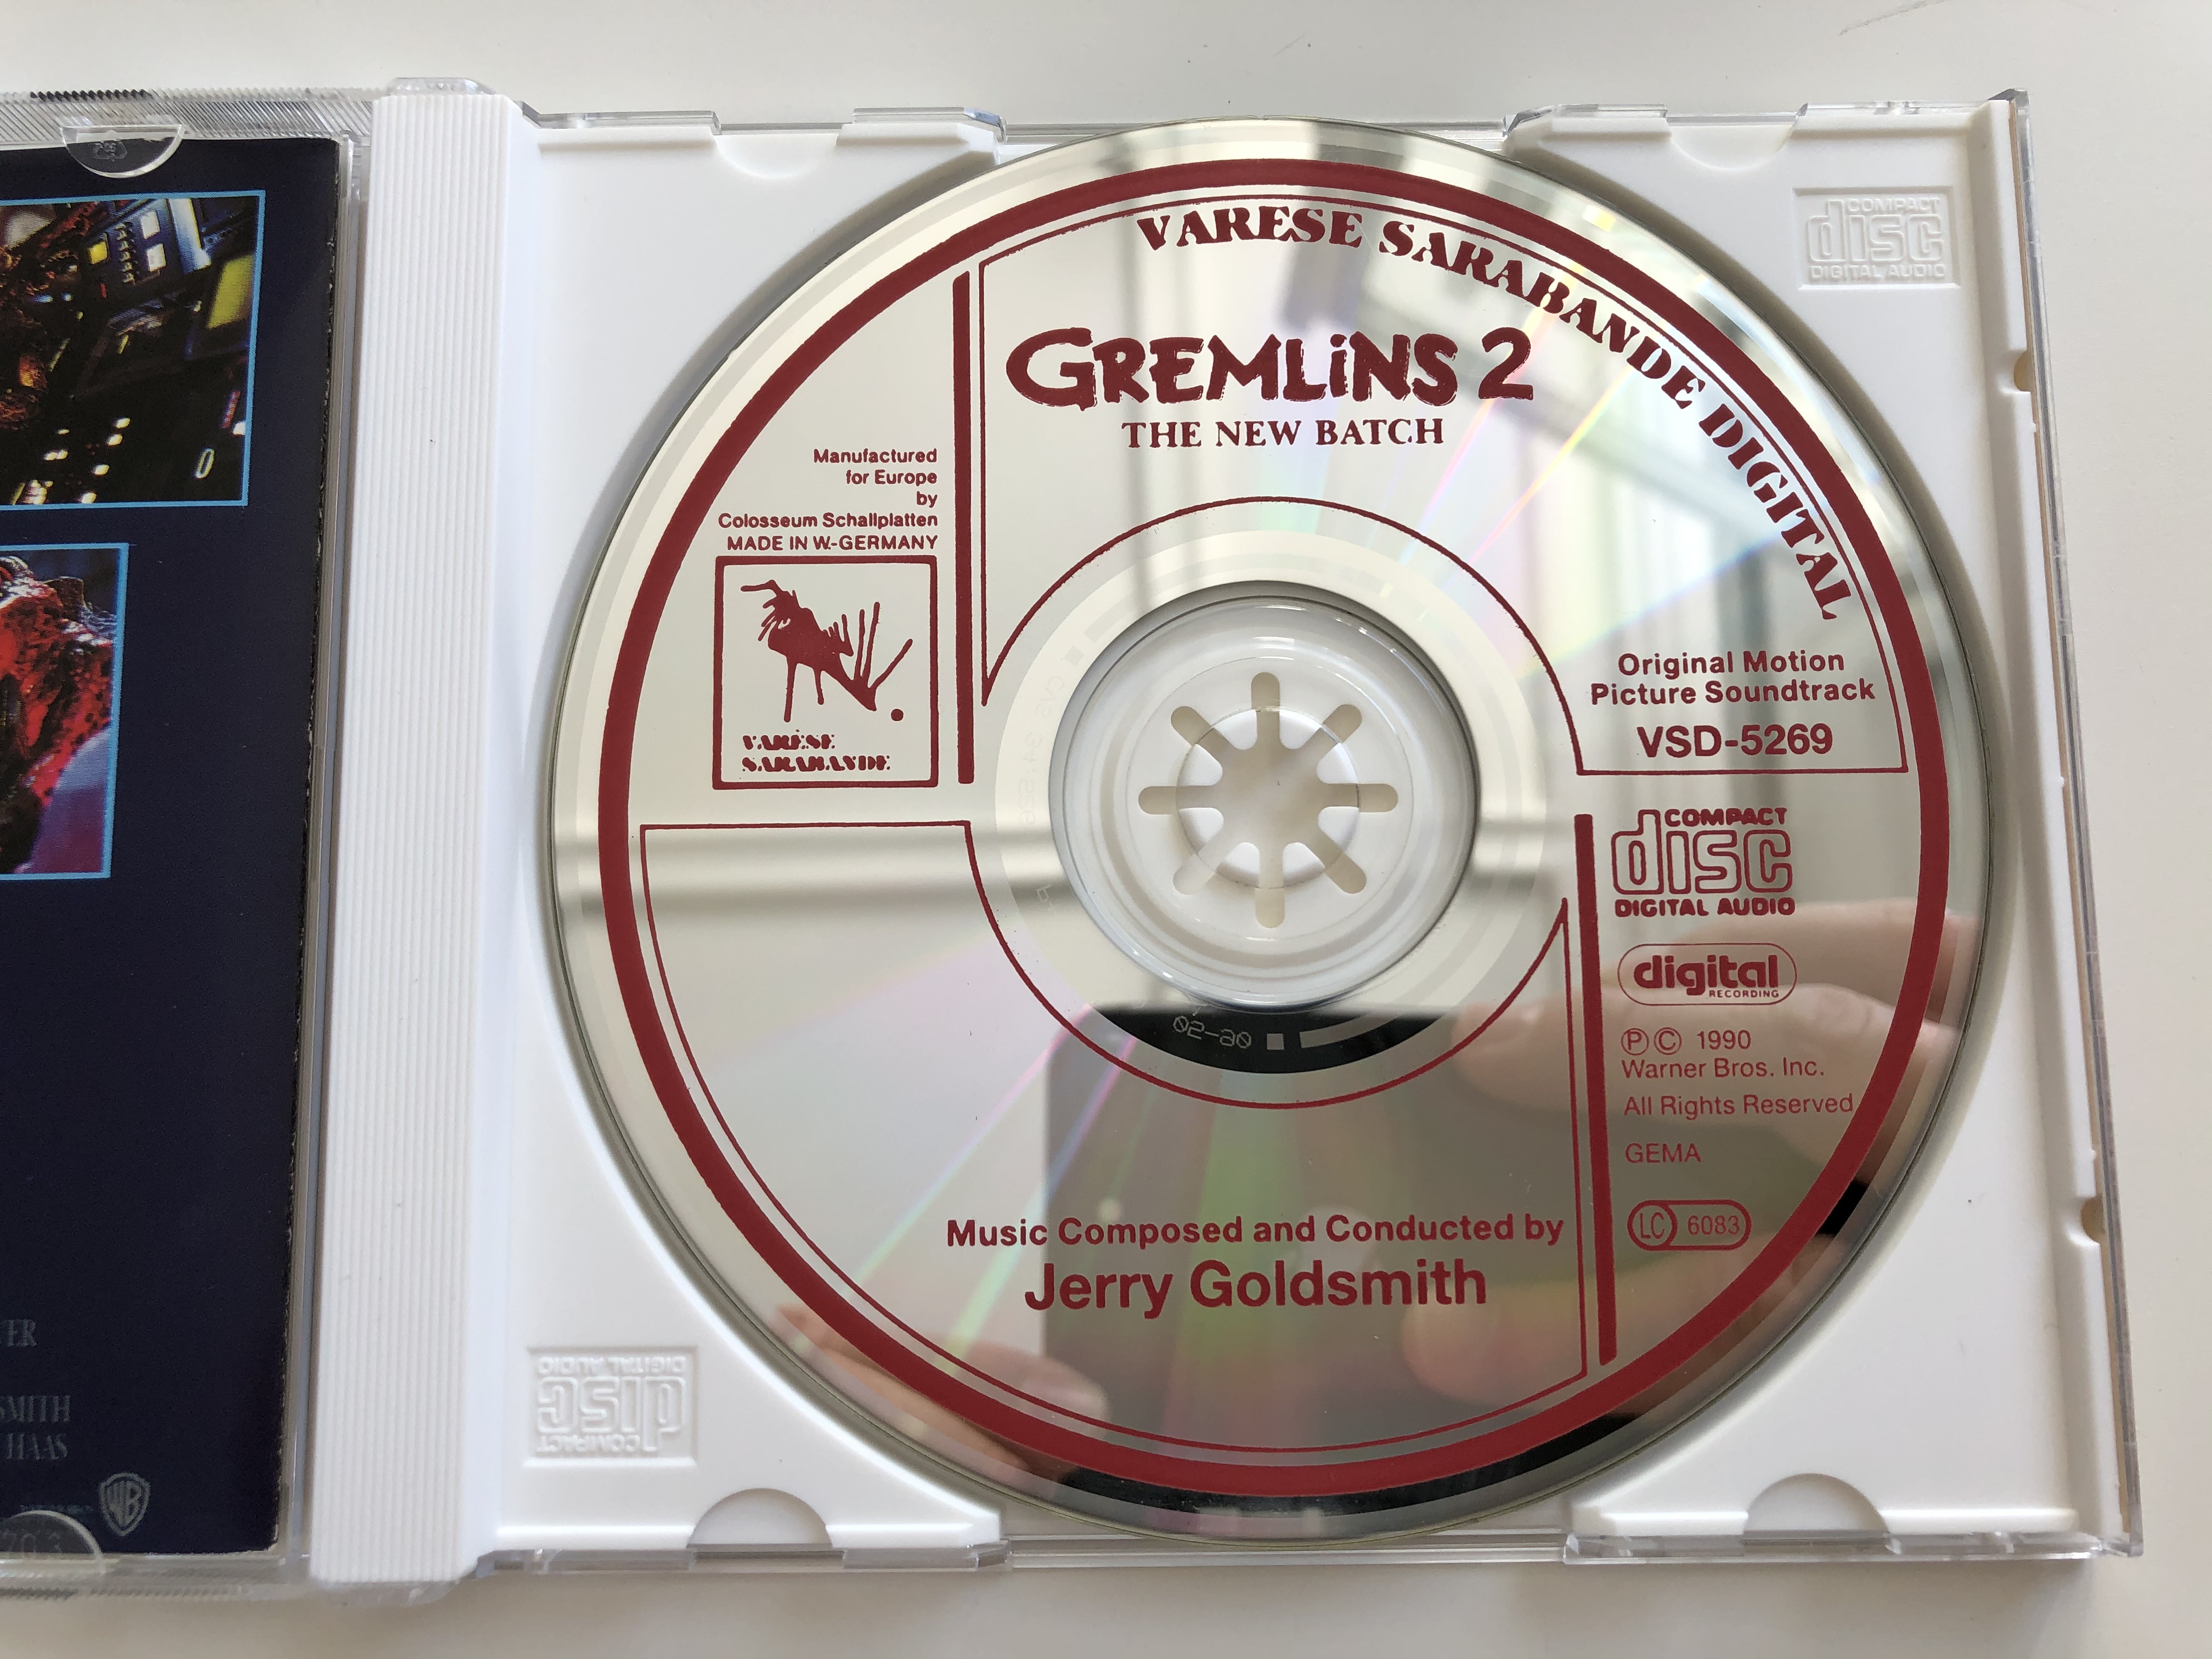 original-motion-picture-soundtrack-gremlins-2-the-new-batch-music-composed-and-conducted-by-jerry-goldsmith-var-se-sarabande-audio-cd-1990-vsd-5269-4-.jpg